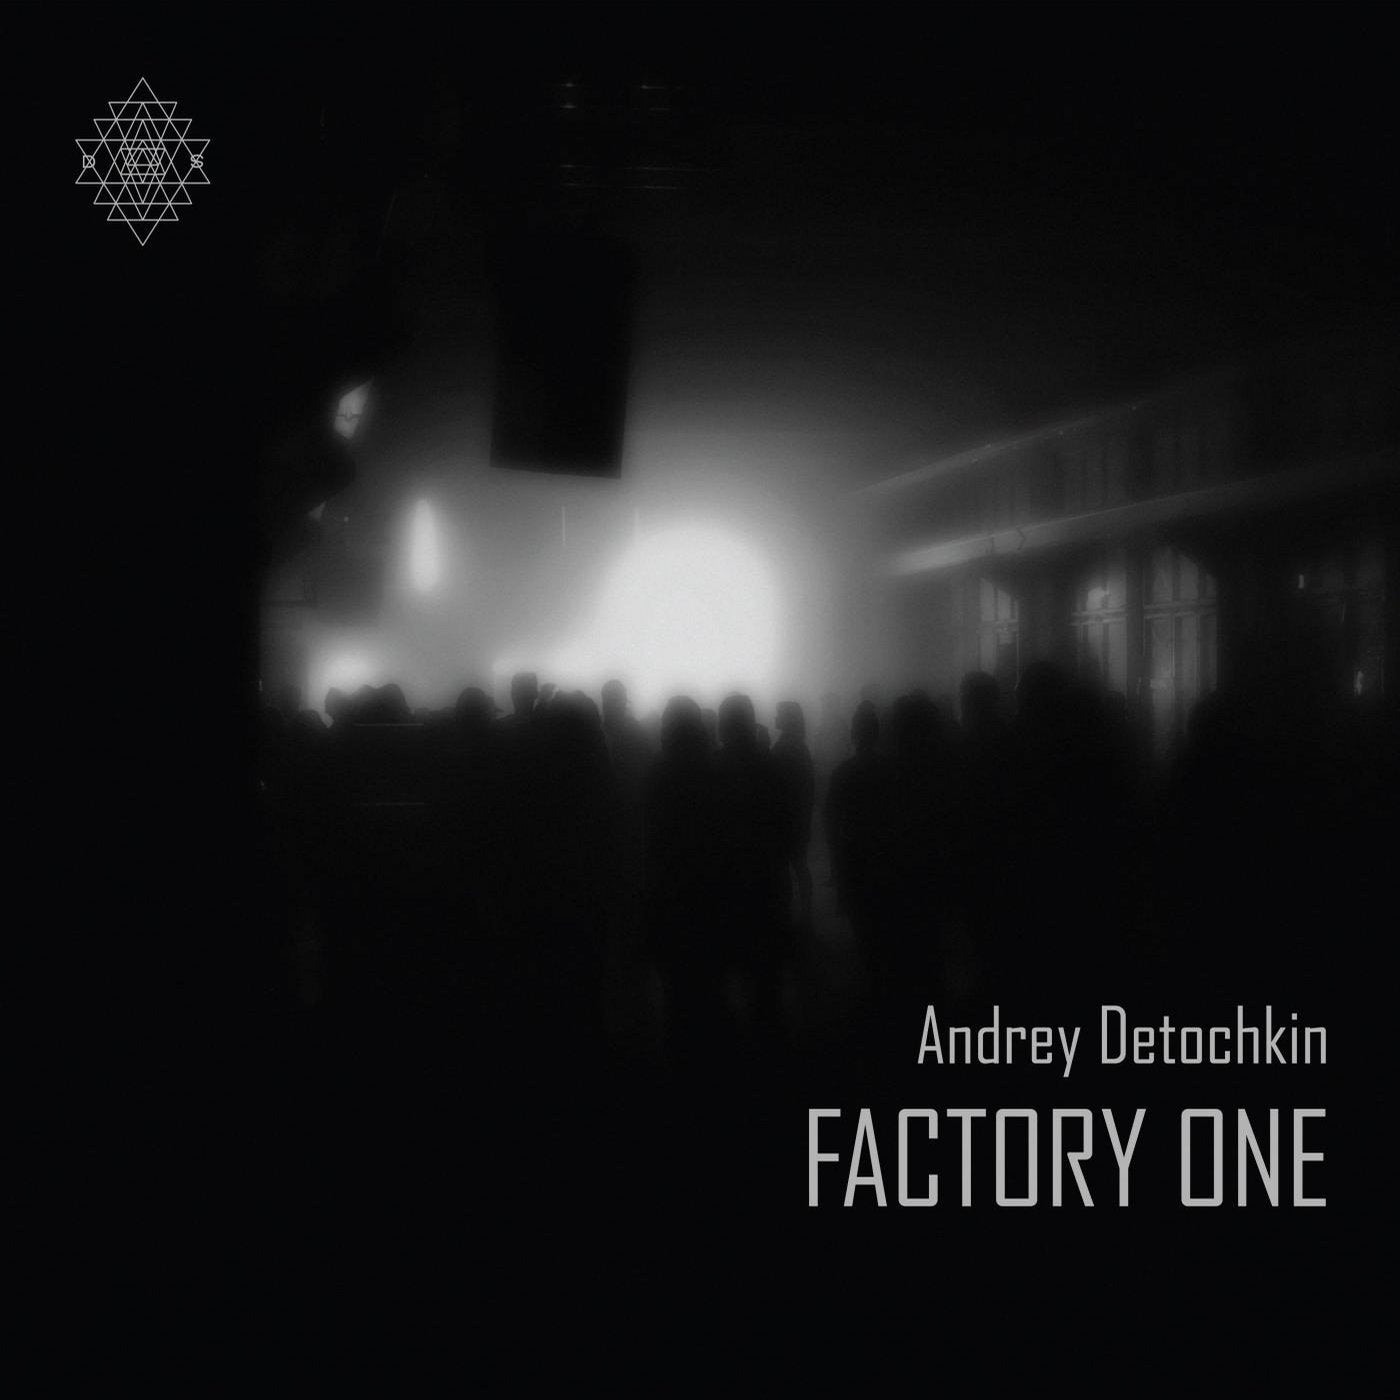 FACTORY ONE